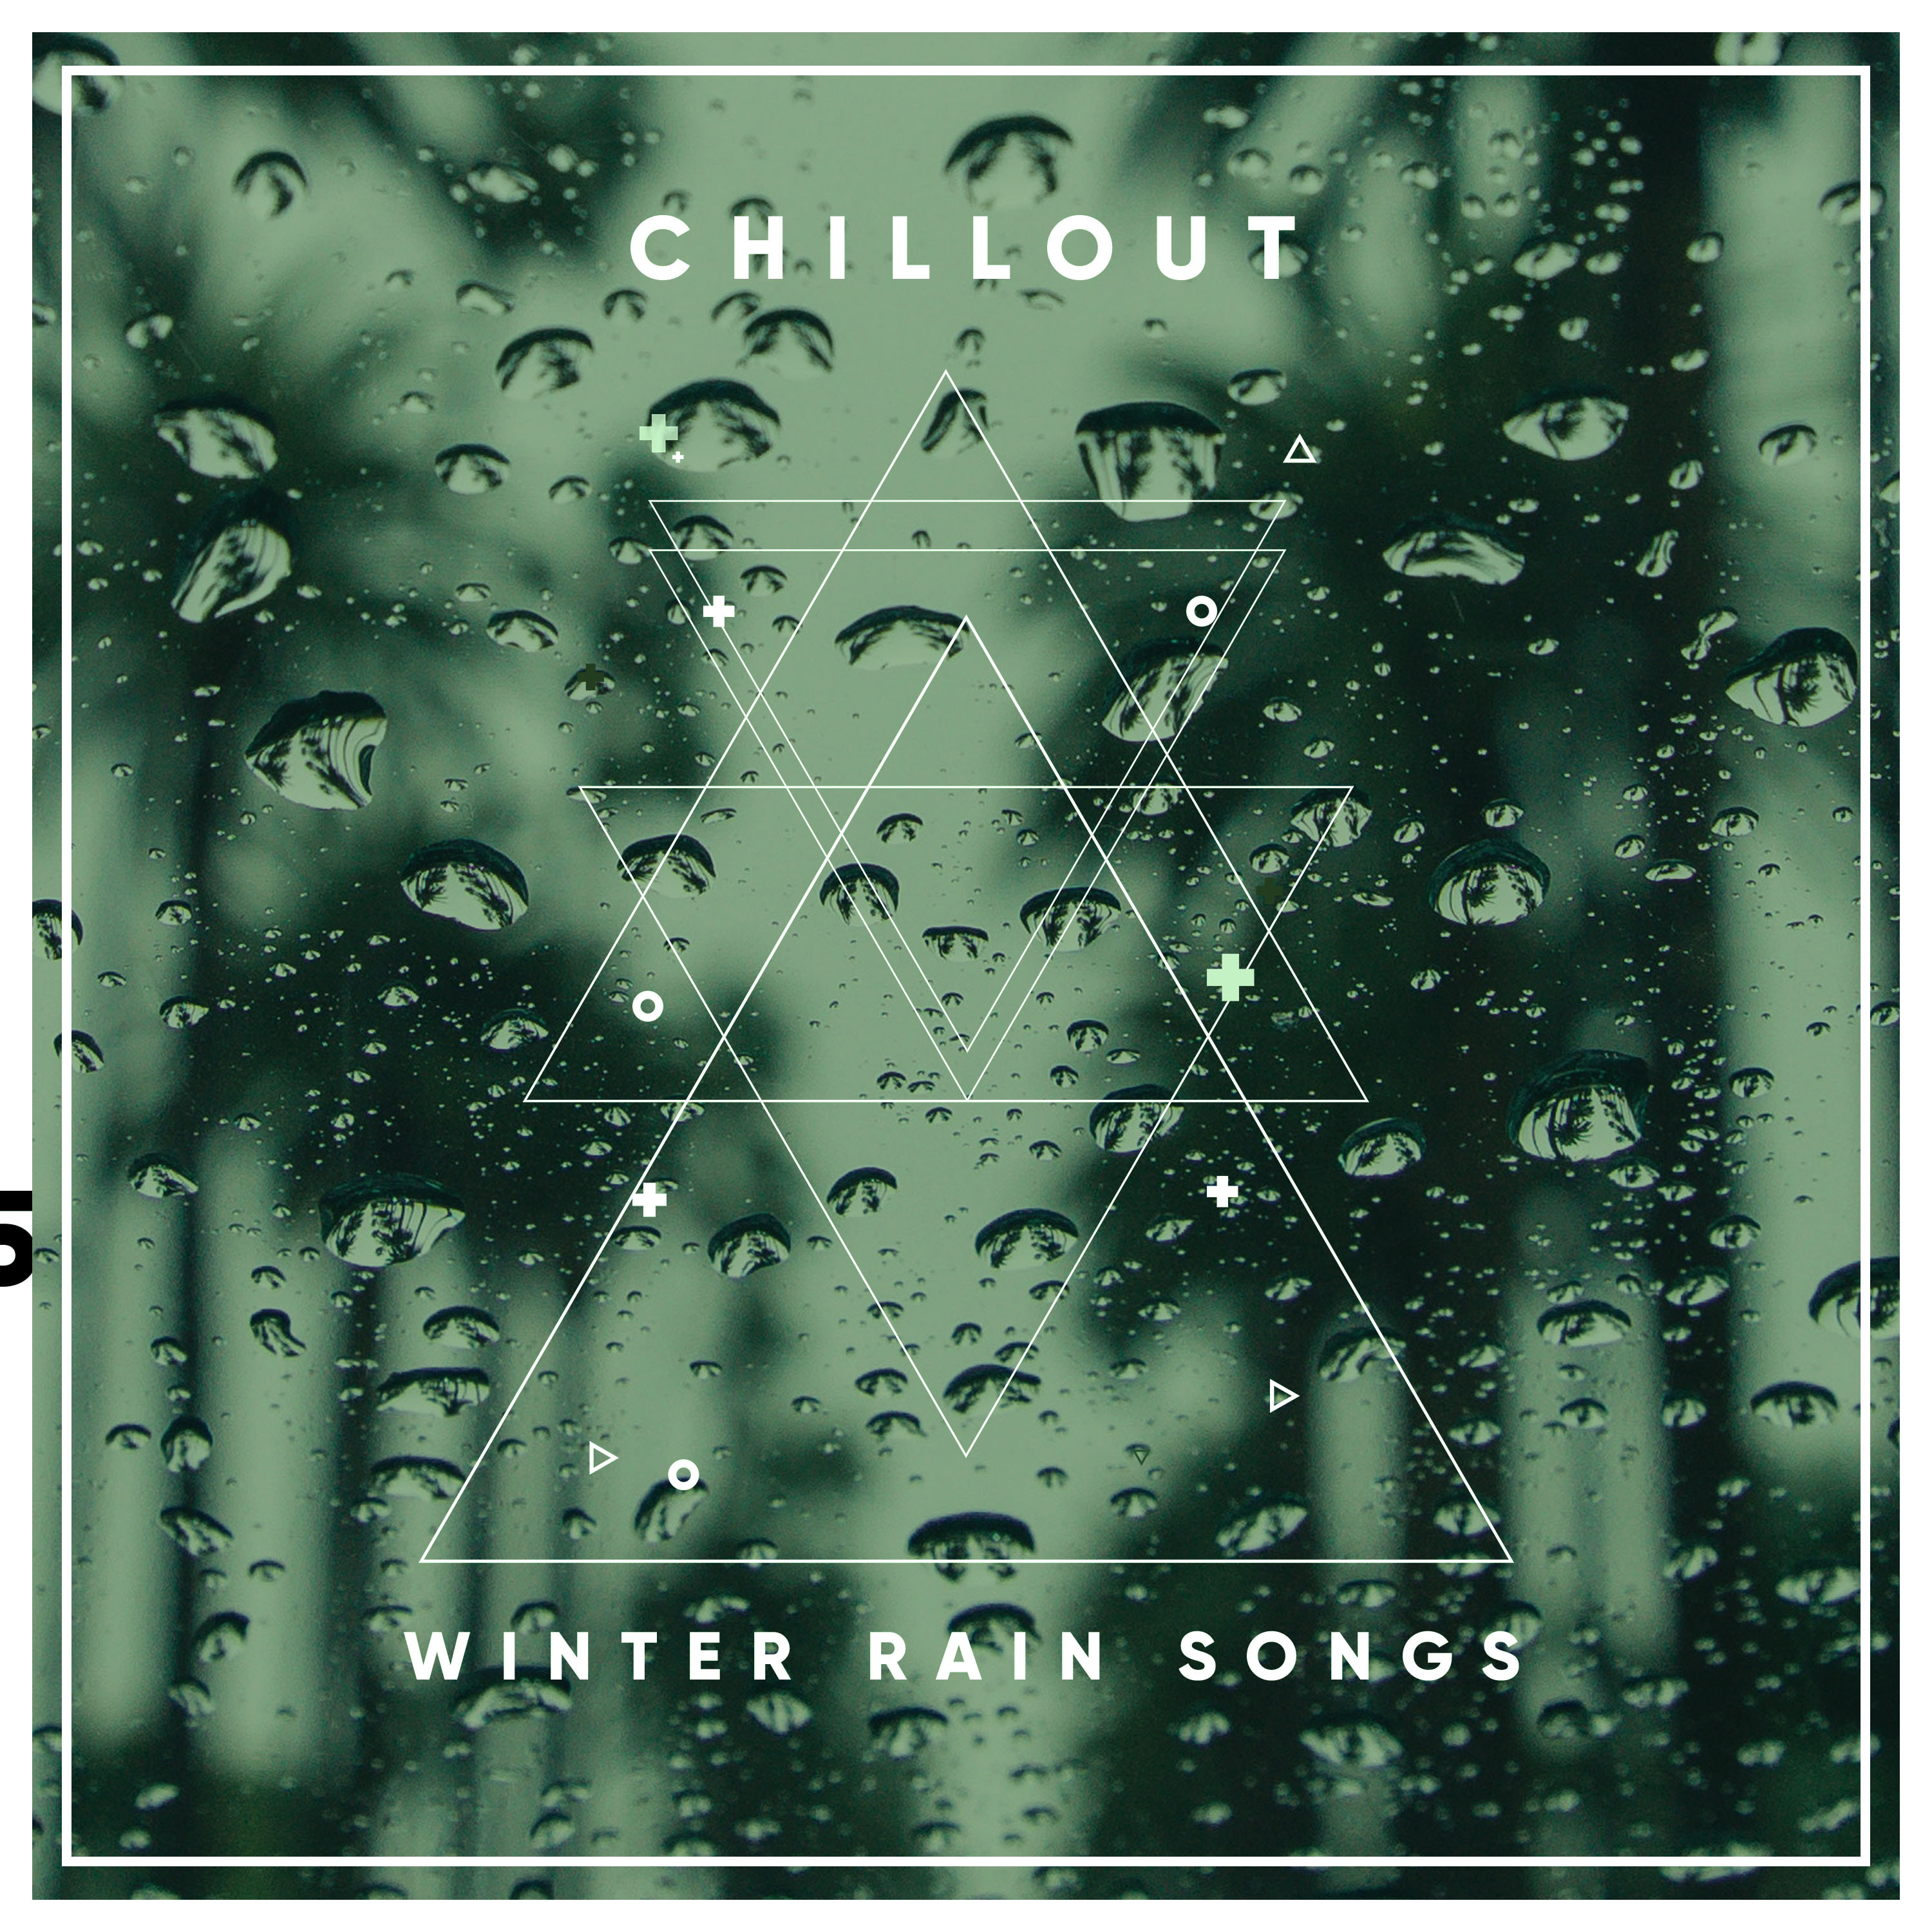 #1 Hour of Chillout Winter Rain Songs